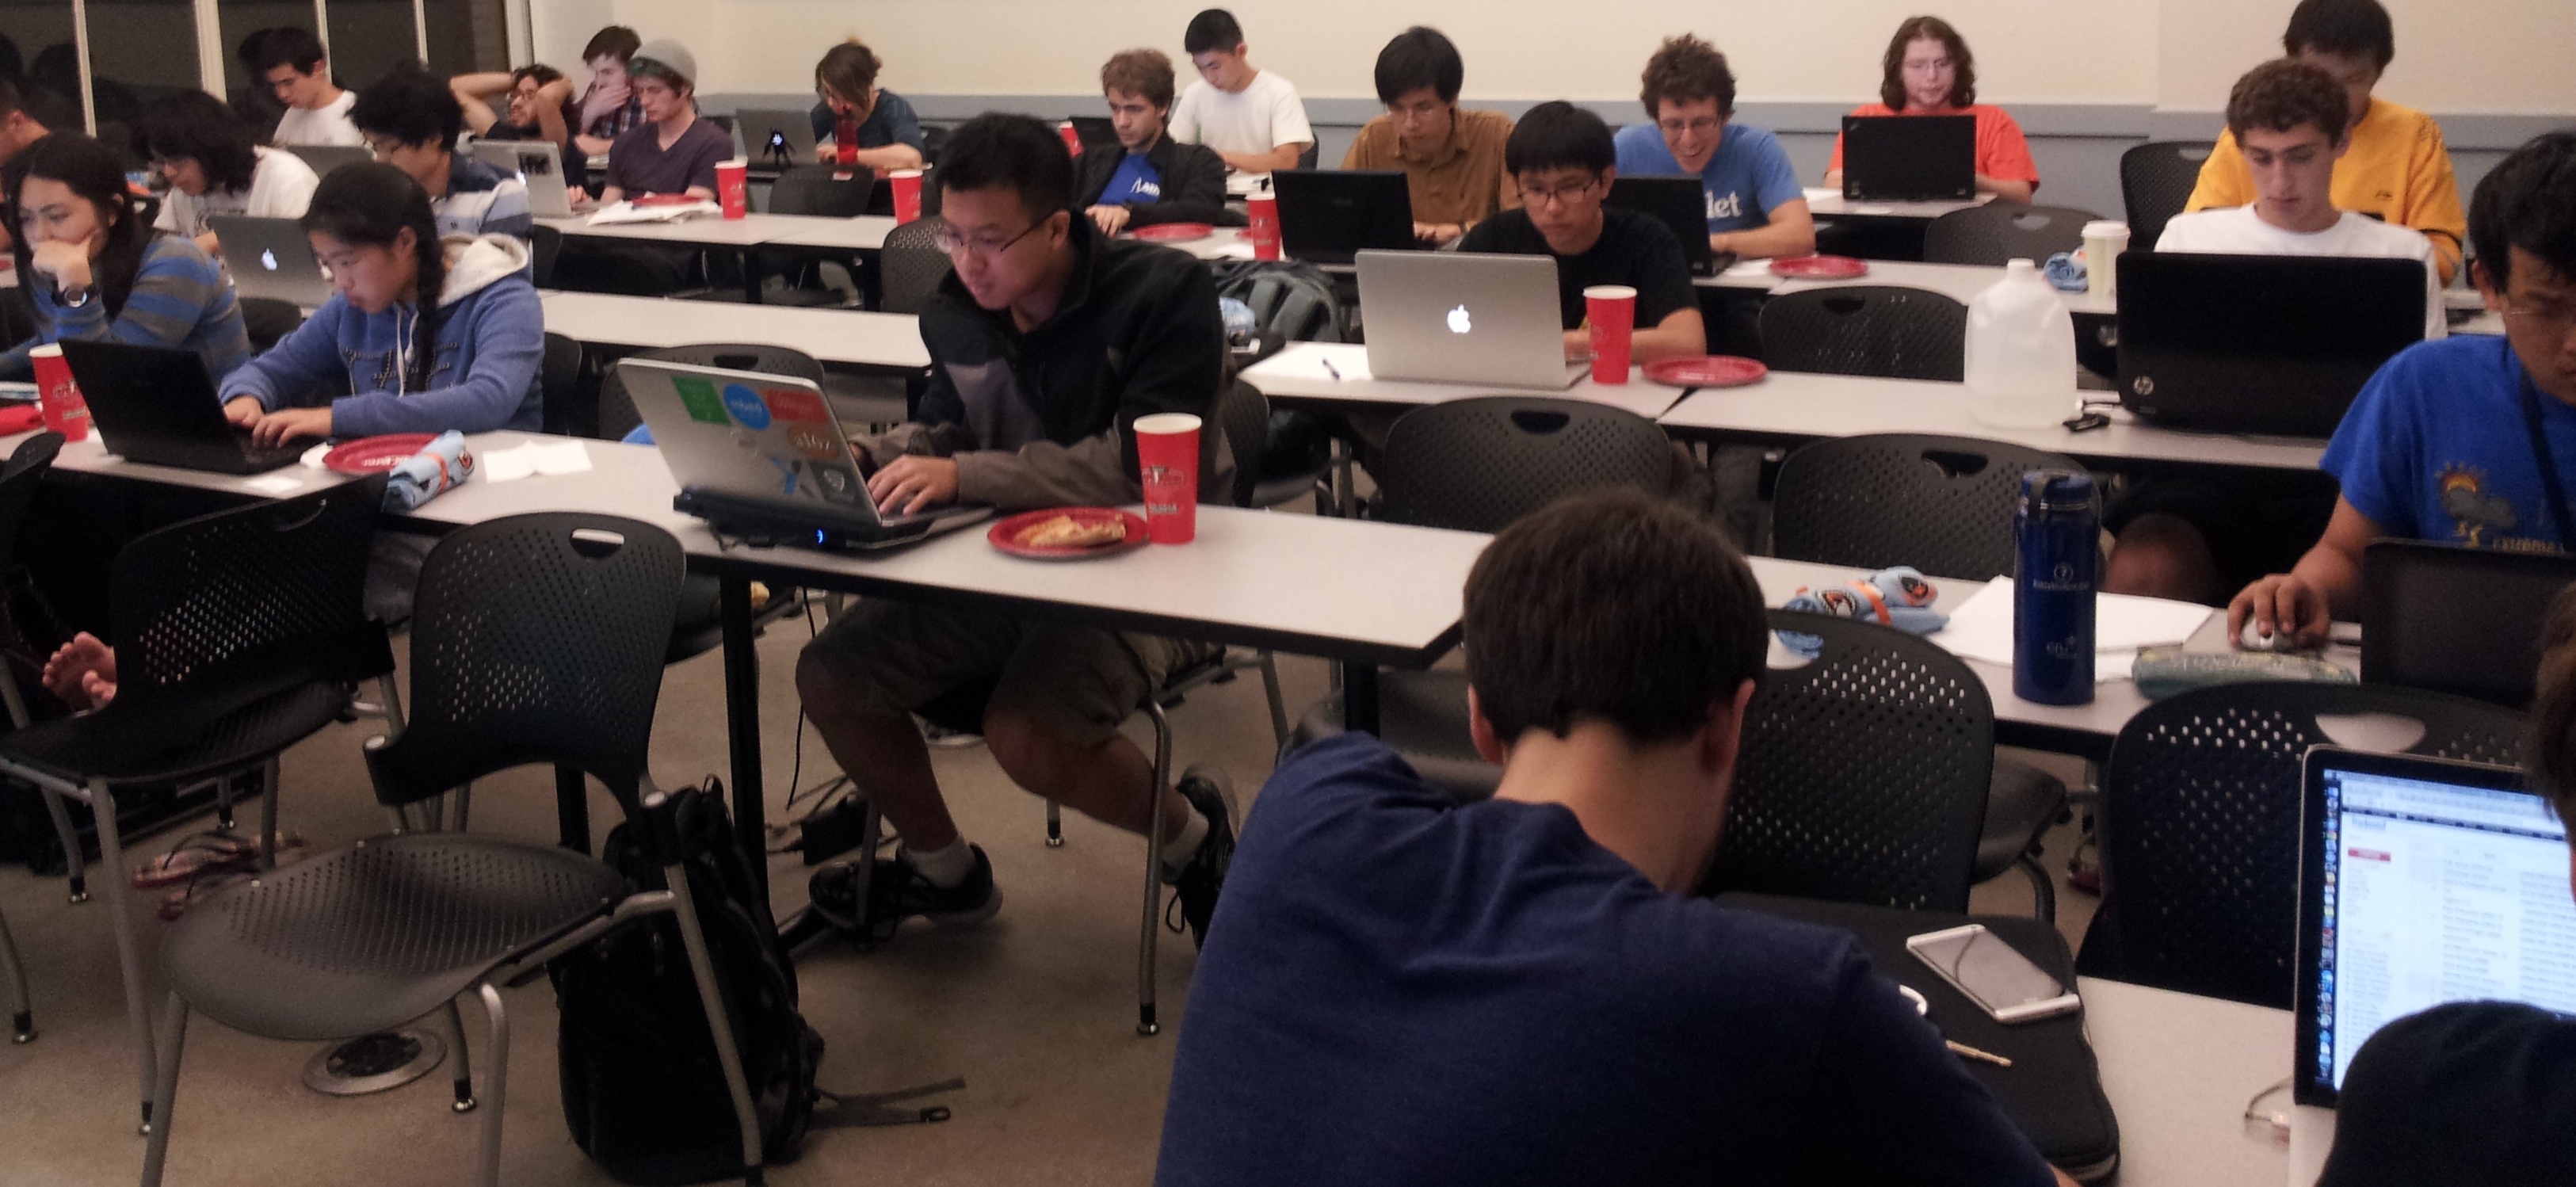 July Challenge 2014 Coding Competition